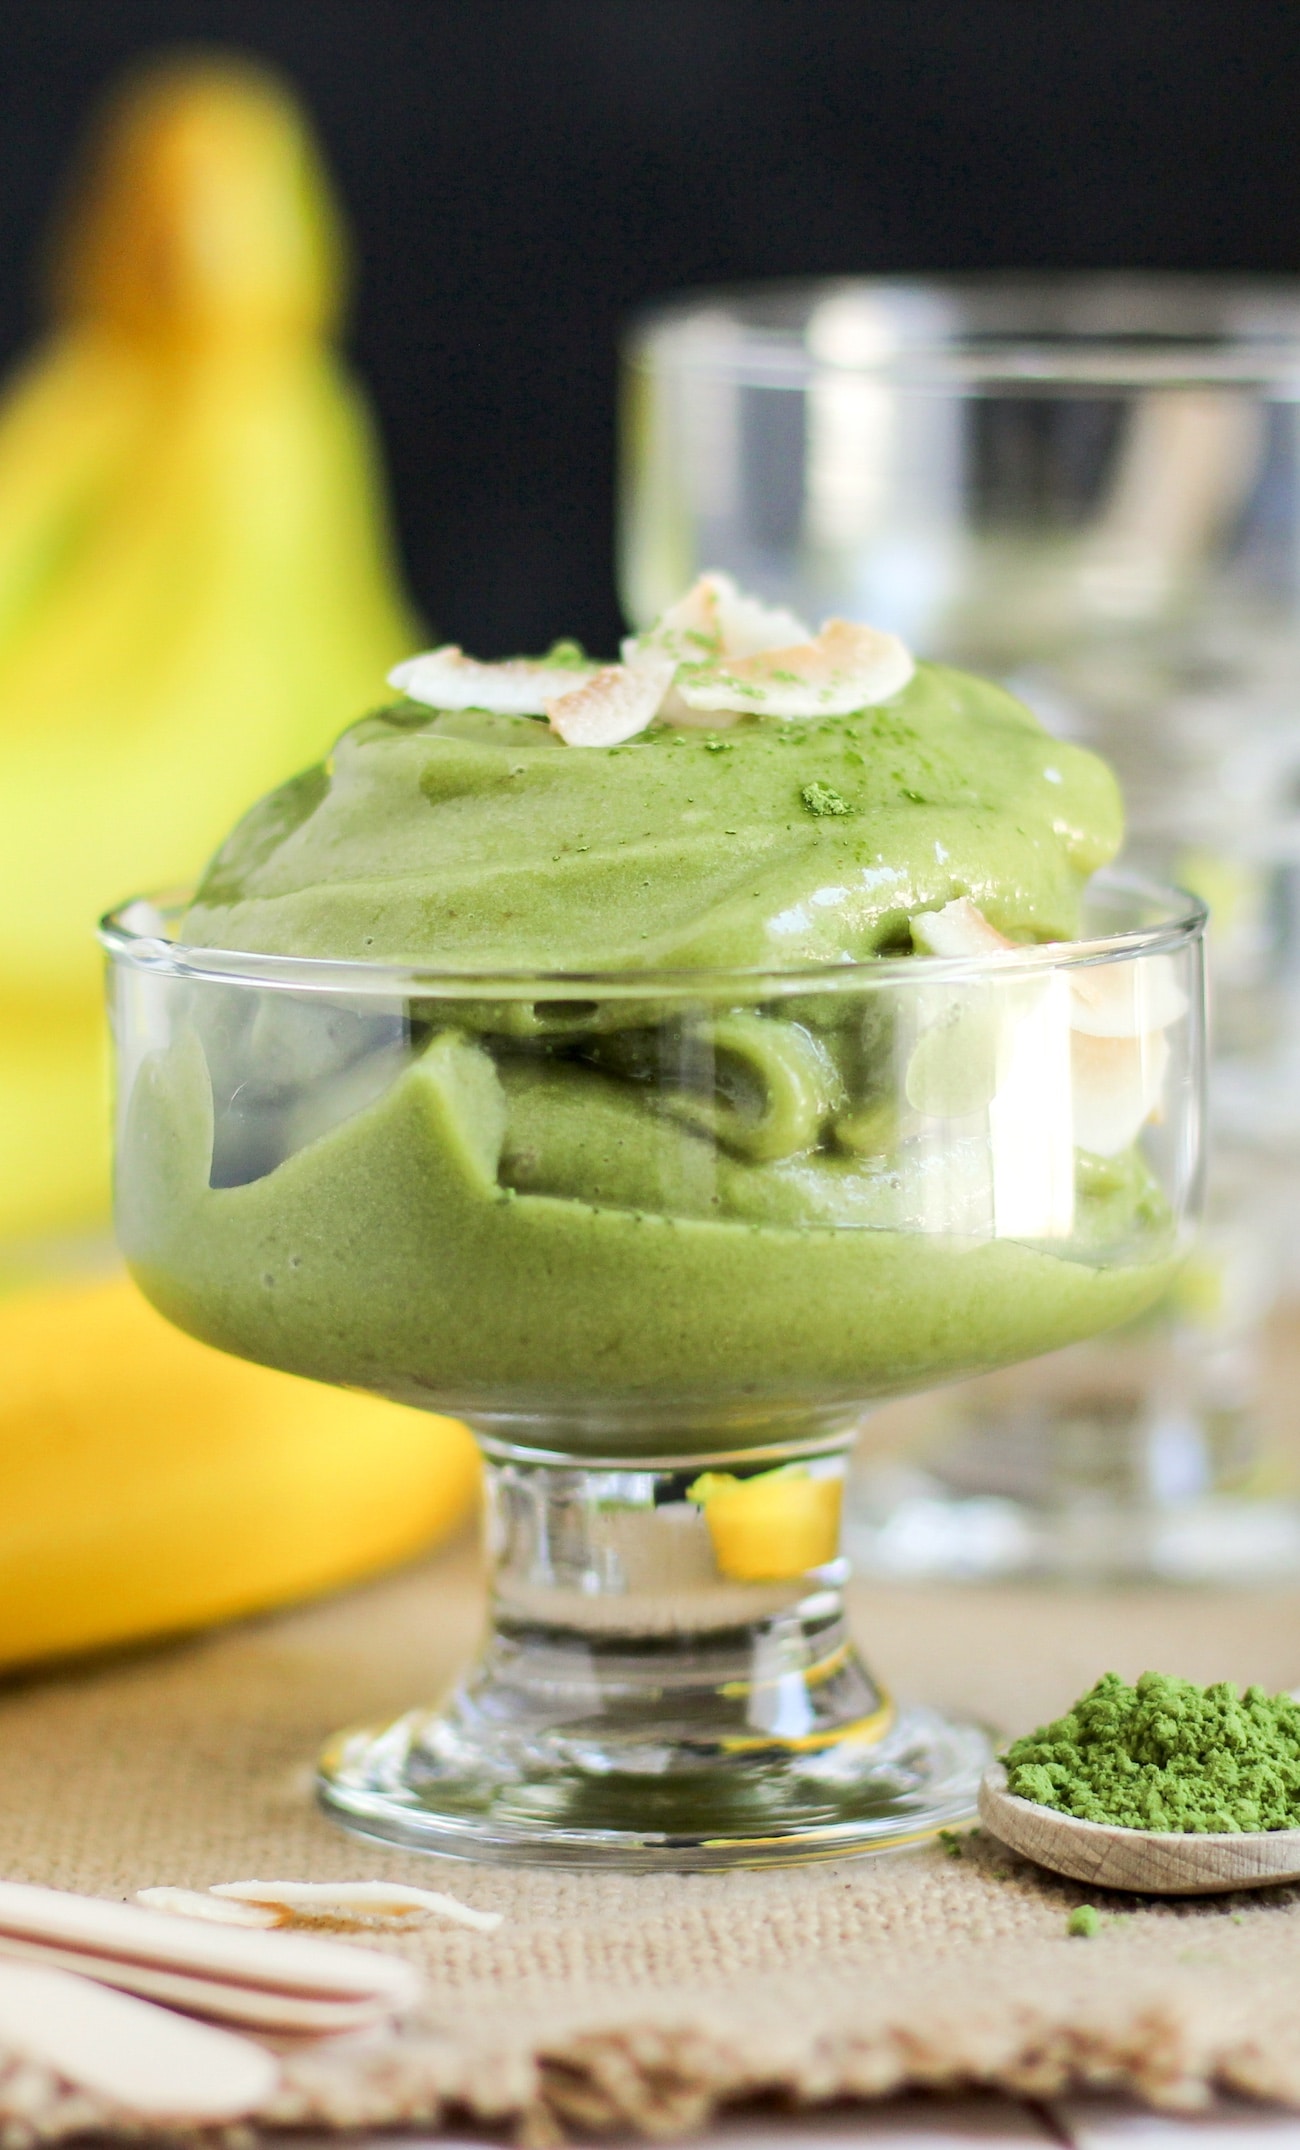 Healthy Matcha Green Tea Nice Cream -- Healthy Dessert Recipes with sugar free, low calorie, low fat, high protein, gluten free, dairy free, and vegan options at the Desserts With Benefits Blog (www.DessertsWithBenefits.com)